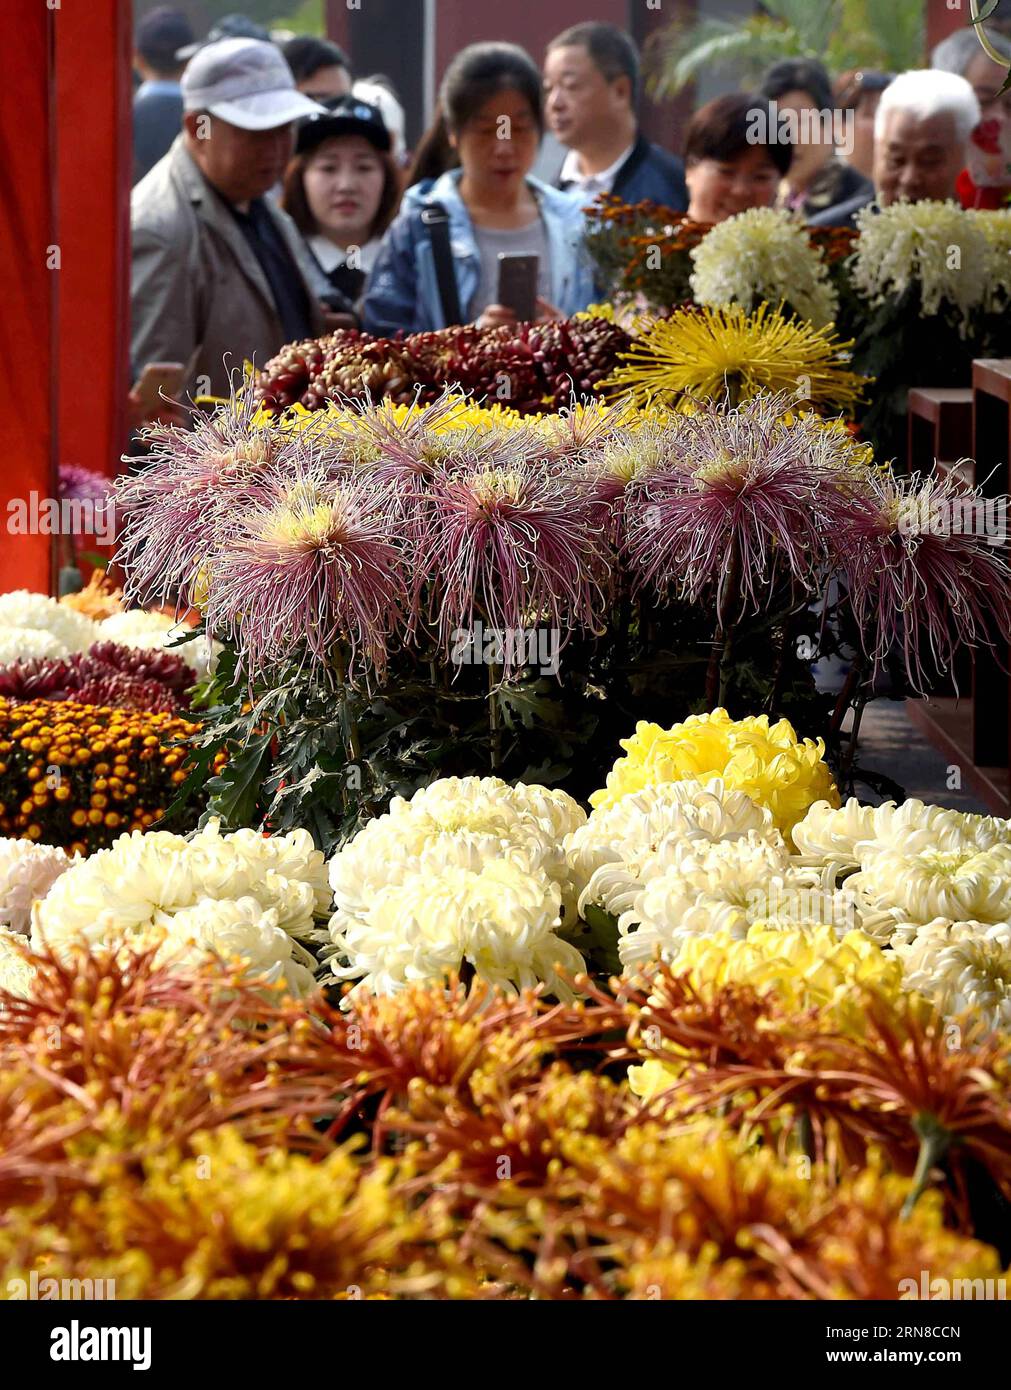 (151017) -- KAIFENG, Oct. 17, 2015 -- Visitors view chrysanthemums in Kaifeng, central China s Henan Province, Oct. 17, 2015. About 2.05 million pots of chrysanthemum in the city bursted into bloom recently. ) (zkr) CHINA-KAIFENG-CHRYSANTHEMUM(CN) LixAn PUBLICATIONxNOTxINxCHN   Kaifeng OCT 17 2015 Visitors View chrysanthemum in Kaifeng Central China S Henan Province OCT 17 2015 About 2 05 Million Pot of Chrysanthemum in The City bursted into Bloom Recently CCR China Kaifeng Chrysanthemum CN LixAn PUBLICATIONxNOTxINxCHN Stock Photo